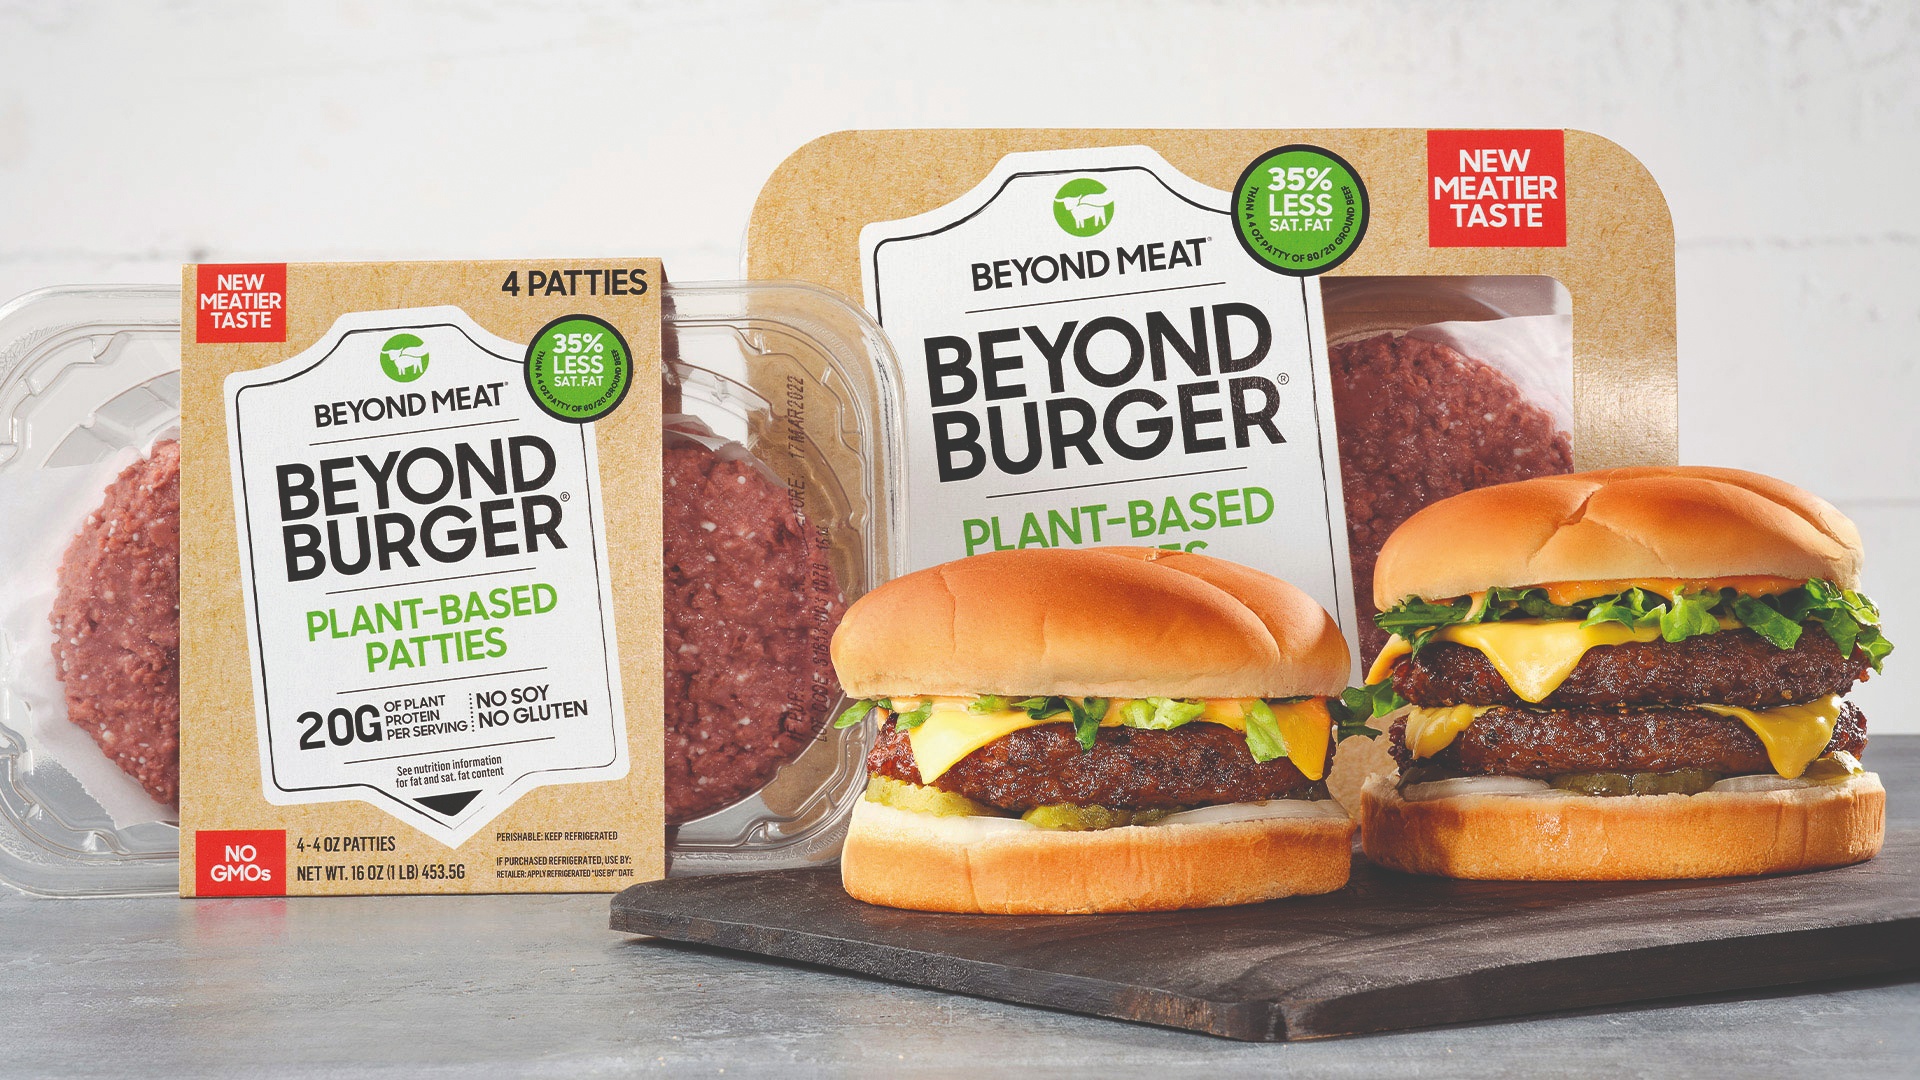 Beyond Meat is a leading plant-based food brand